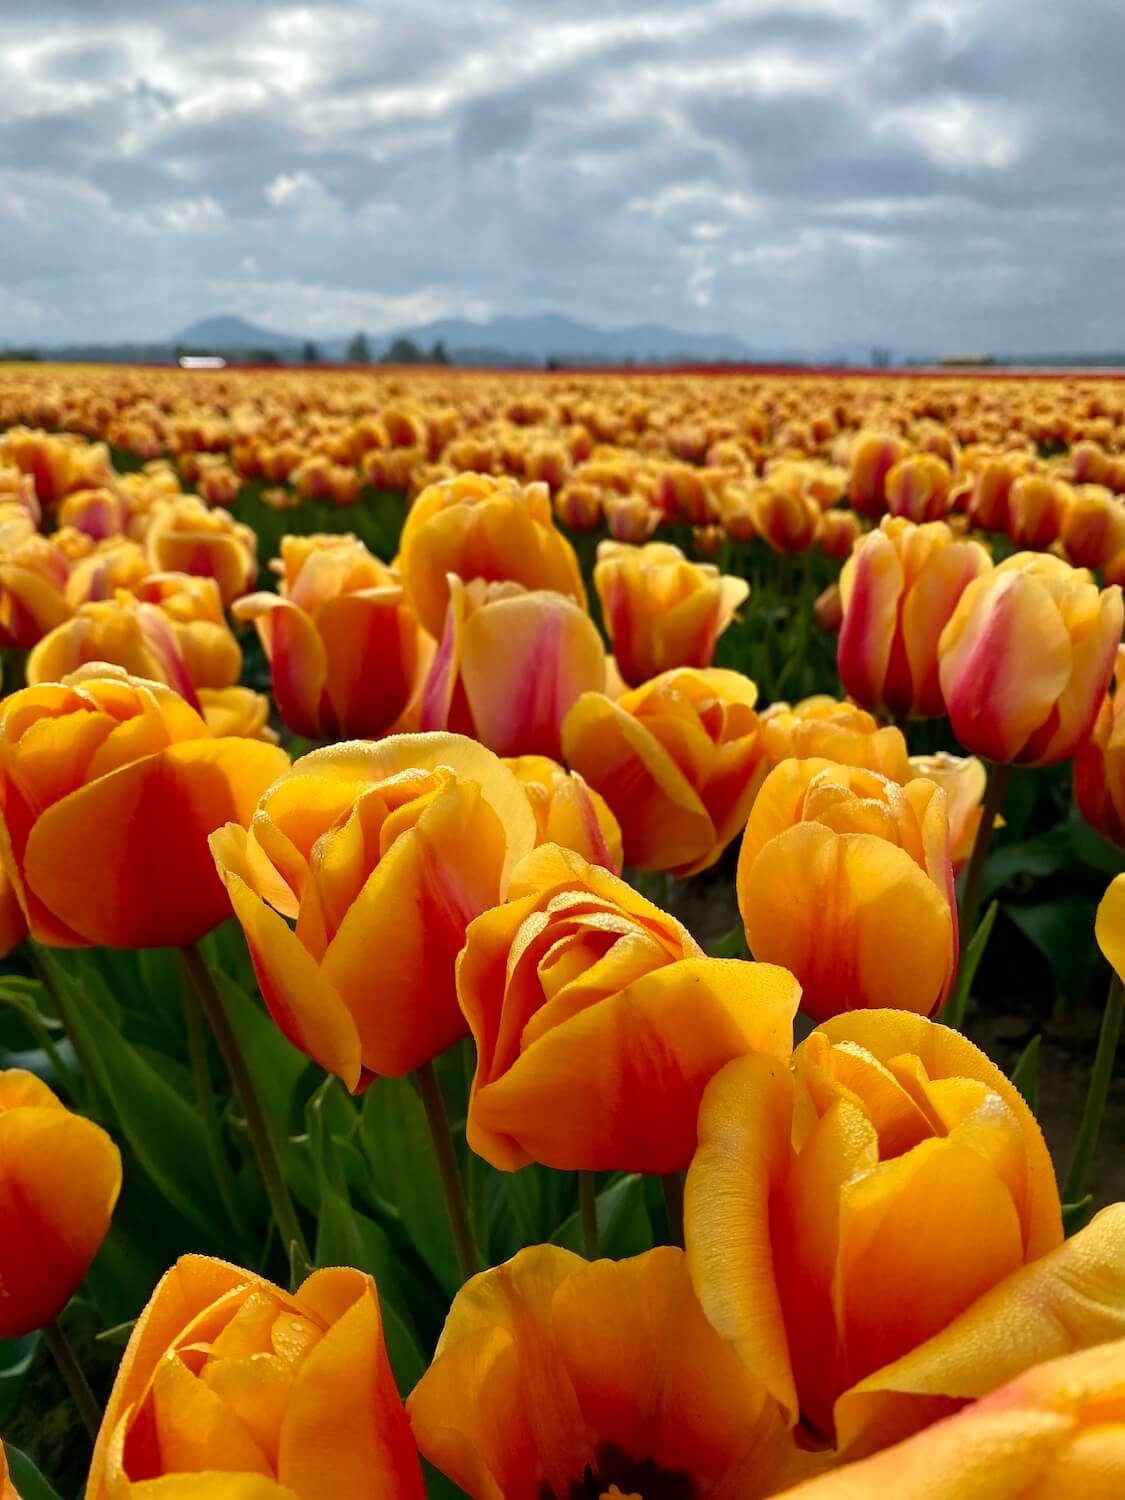 Tulips in season in the Skagit Valley of Washington State. These are yellow with orange highlights and the sky is a stormy gray above the vast fields.